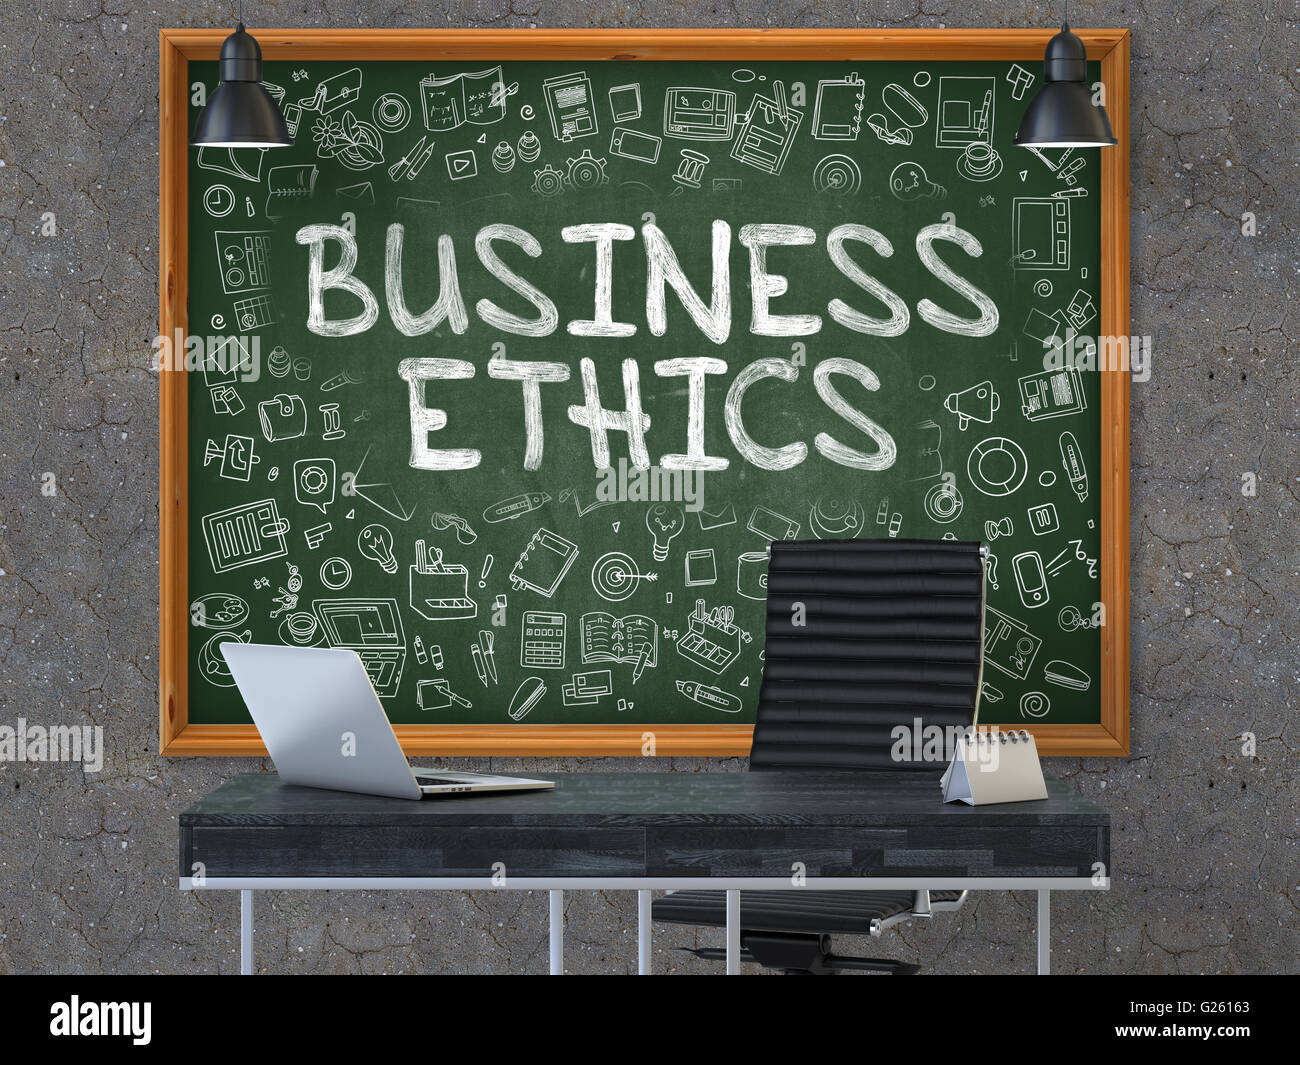 Business Ethics - Hand Drawn on Green Chalkboard. Stock Photo